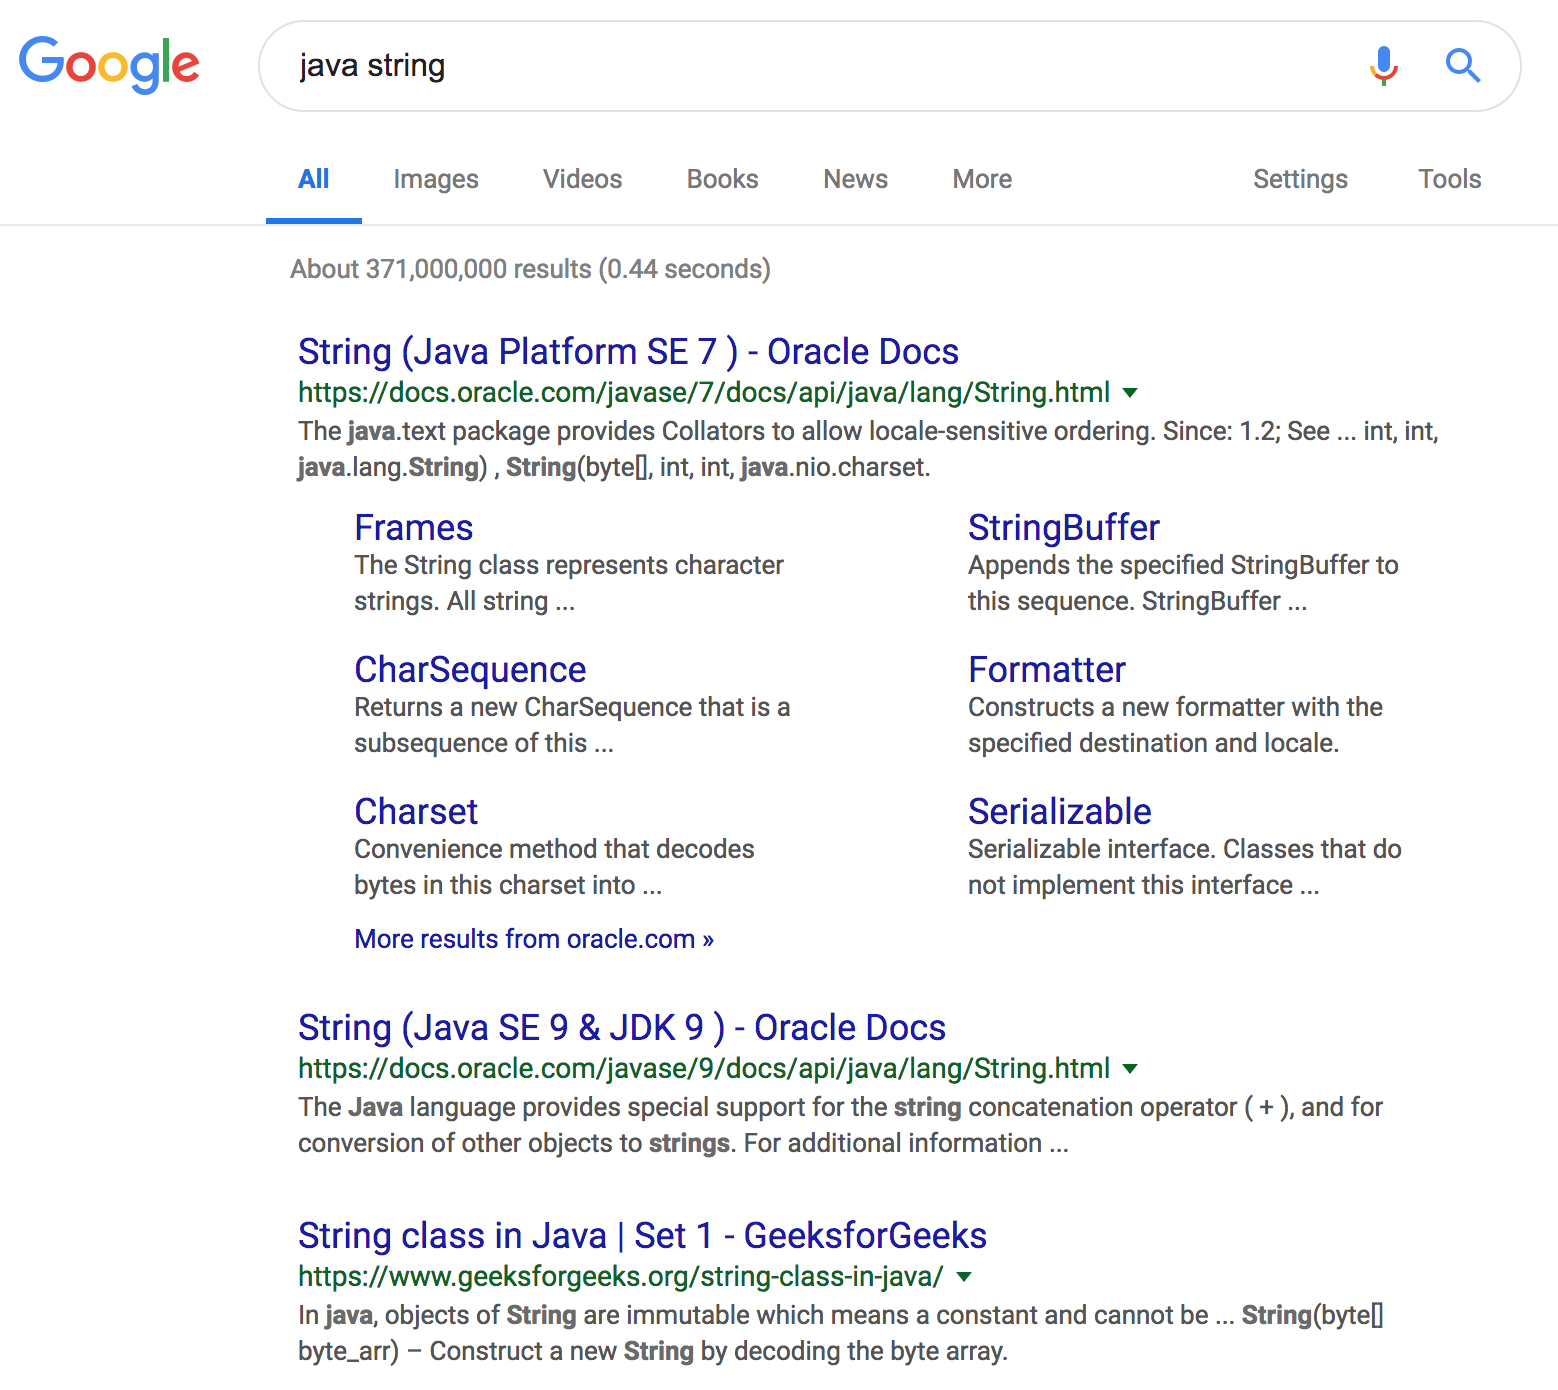 Google search for "java string" showing Java 7
docs